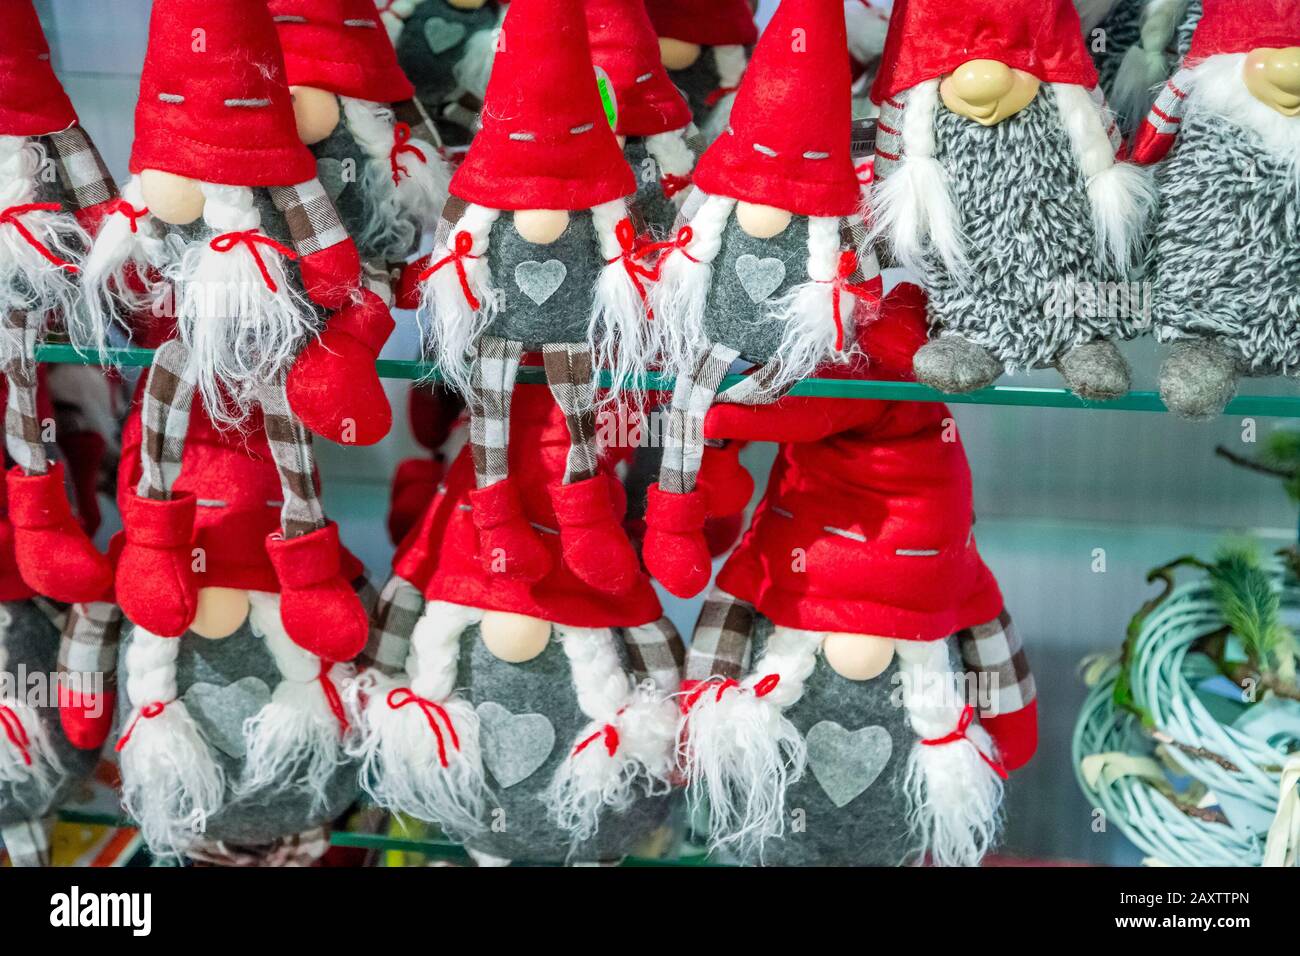 Brunico (BZ), February 12, 2019: light is enlightening puppets for sale in shop Stock Photo